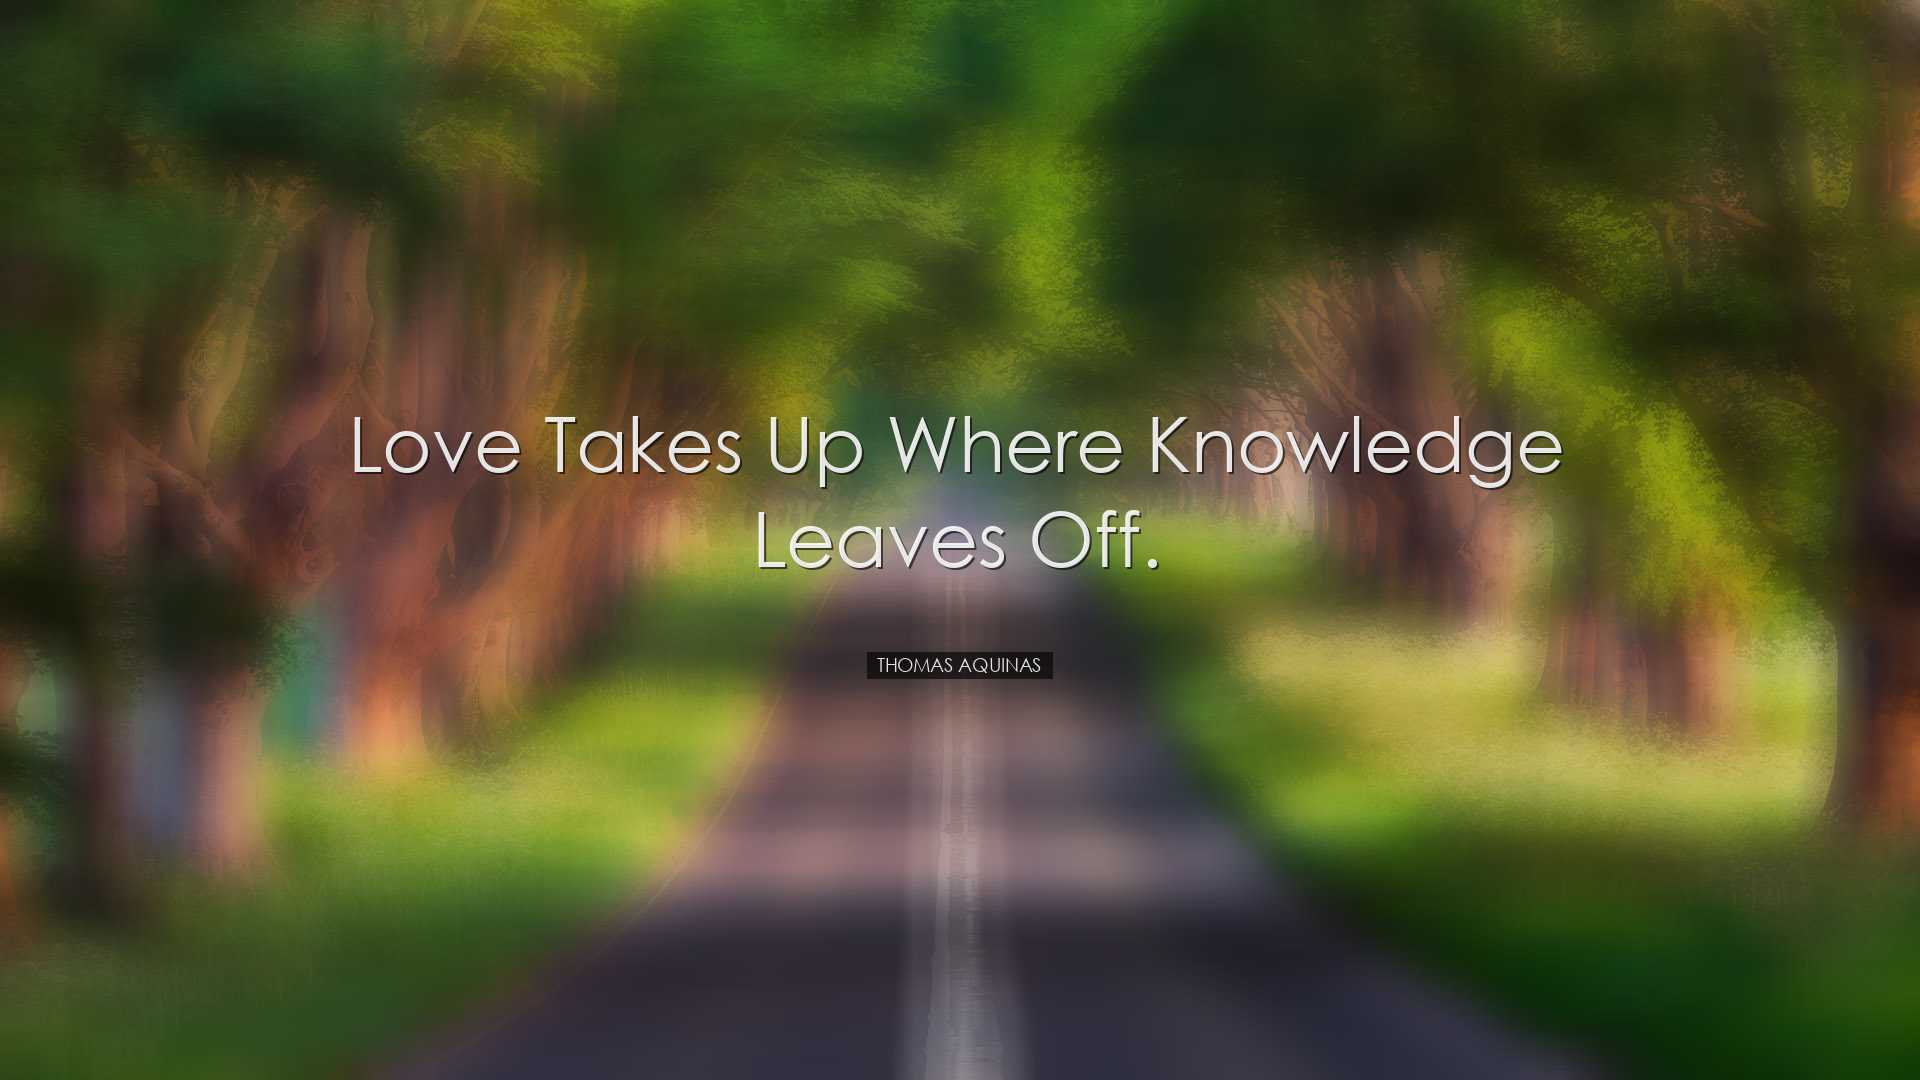 Love takes up where knowledge leaves off. - Thomas Aquinas